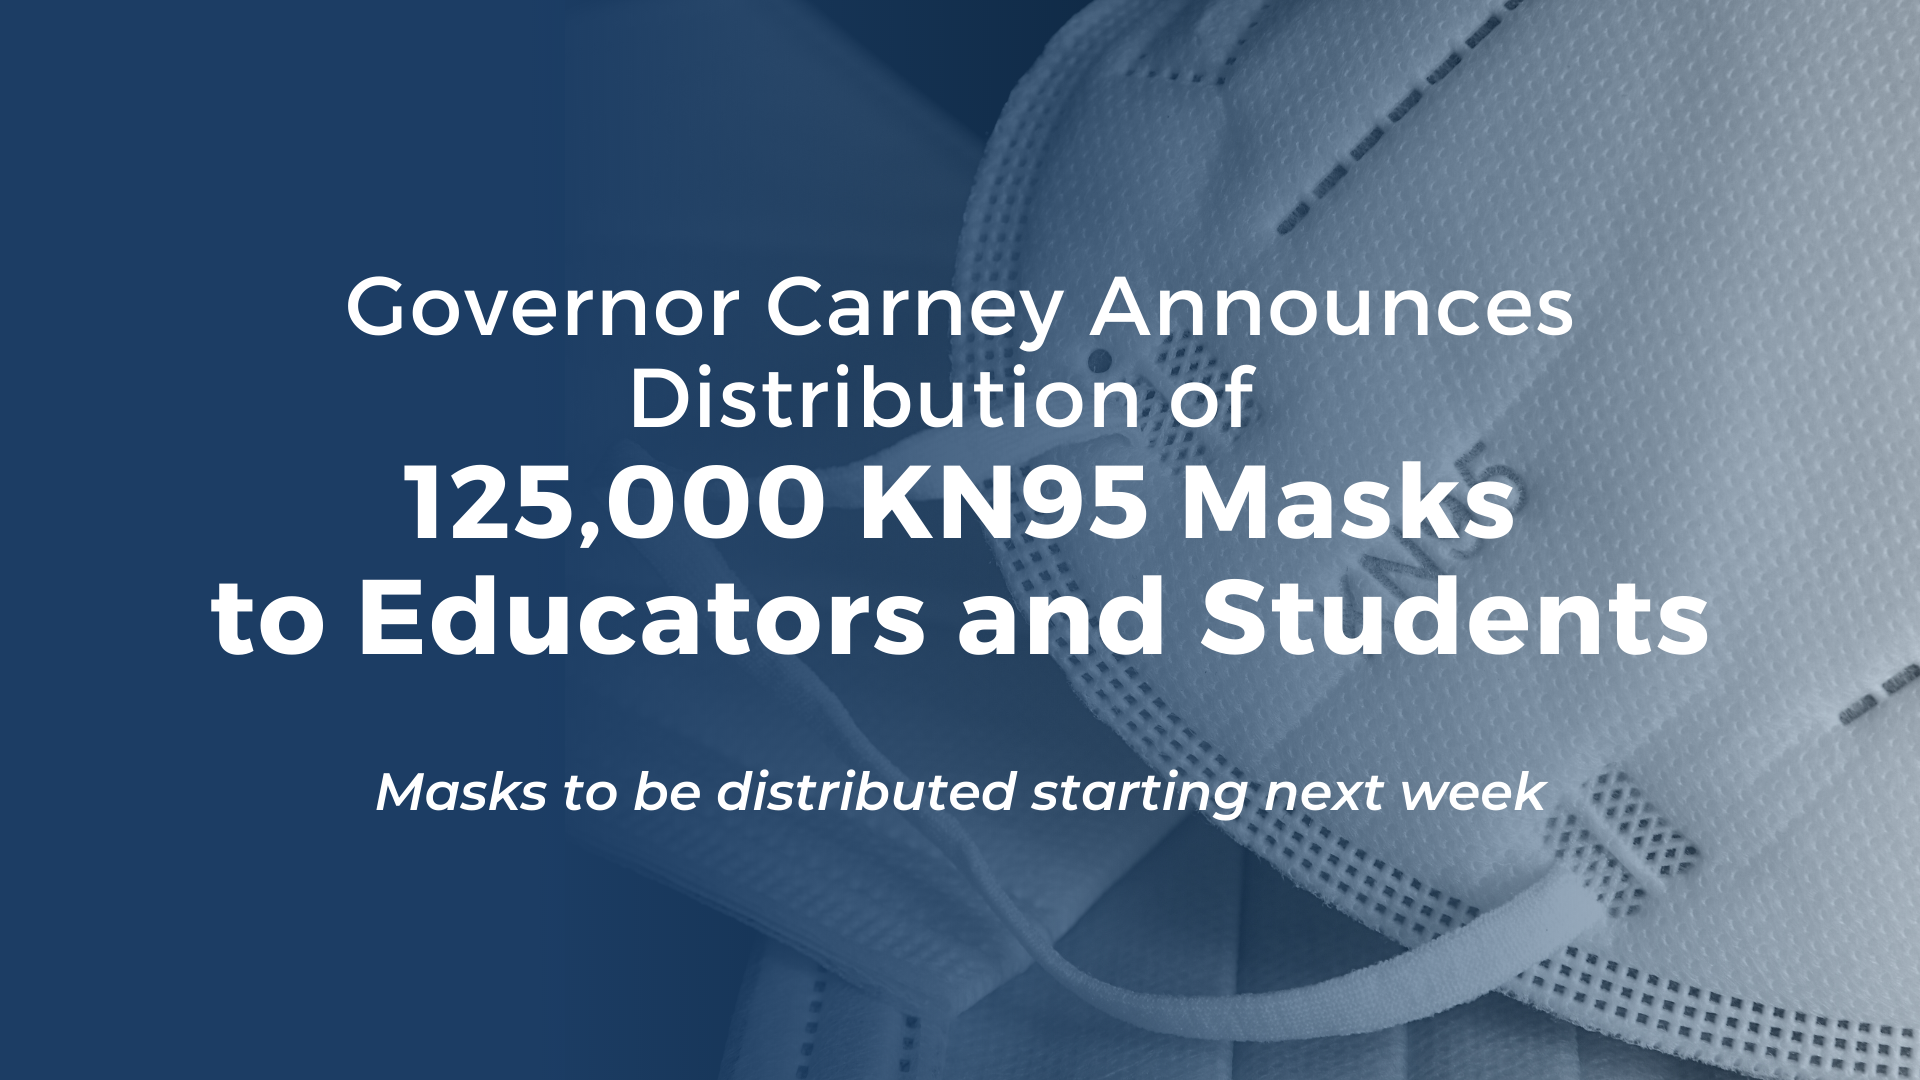 Photo of KN95 masks with text that reads: Governor Carney Announces Distribution of 125,000 KN95 Masks to Educators and Students. Masks to be distributed starting next week.